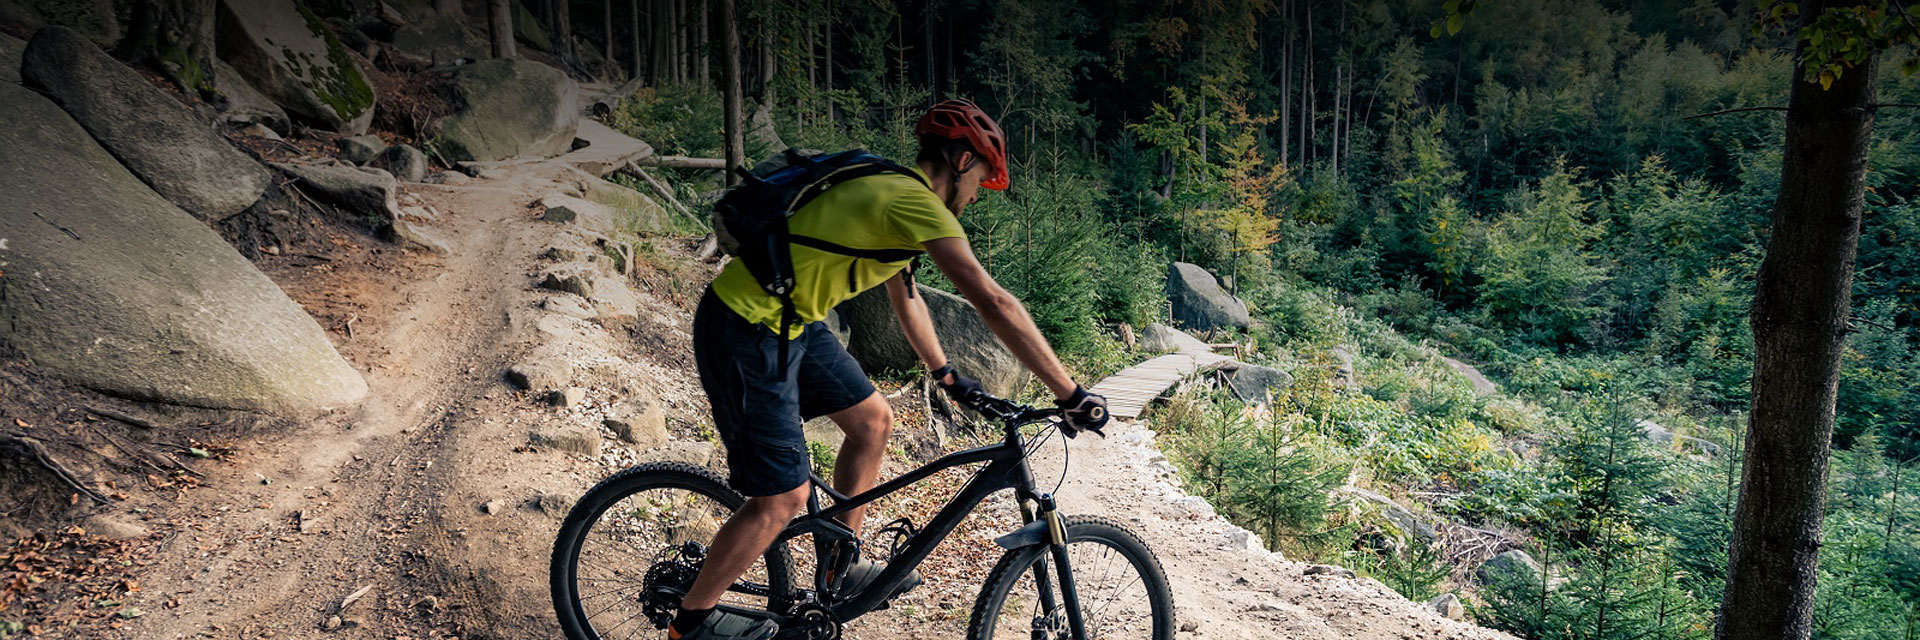 a man riding a mountain bike on a dirt path during the day